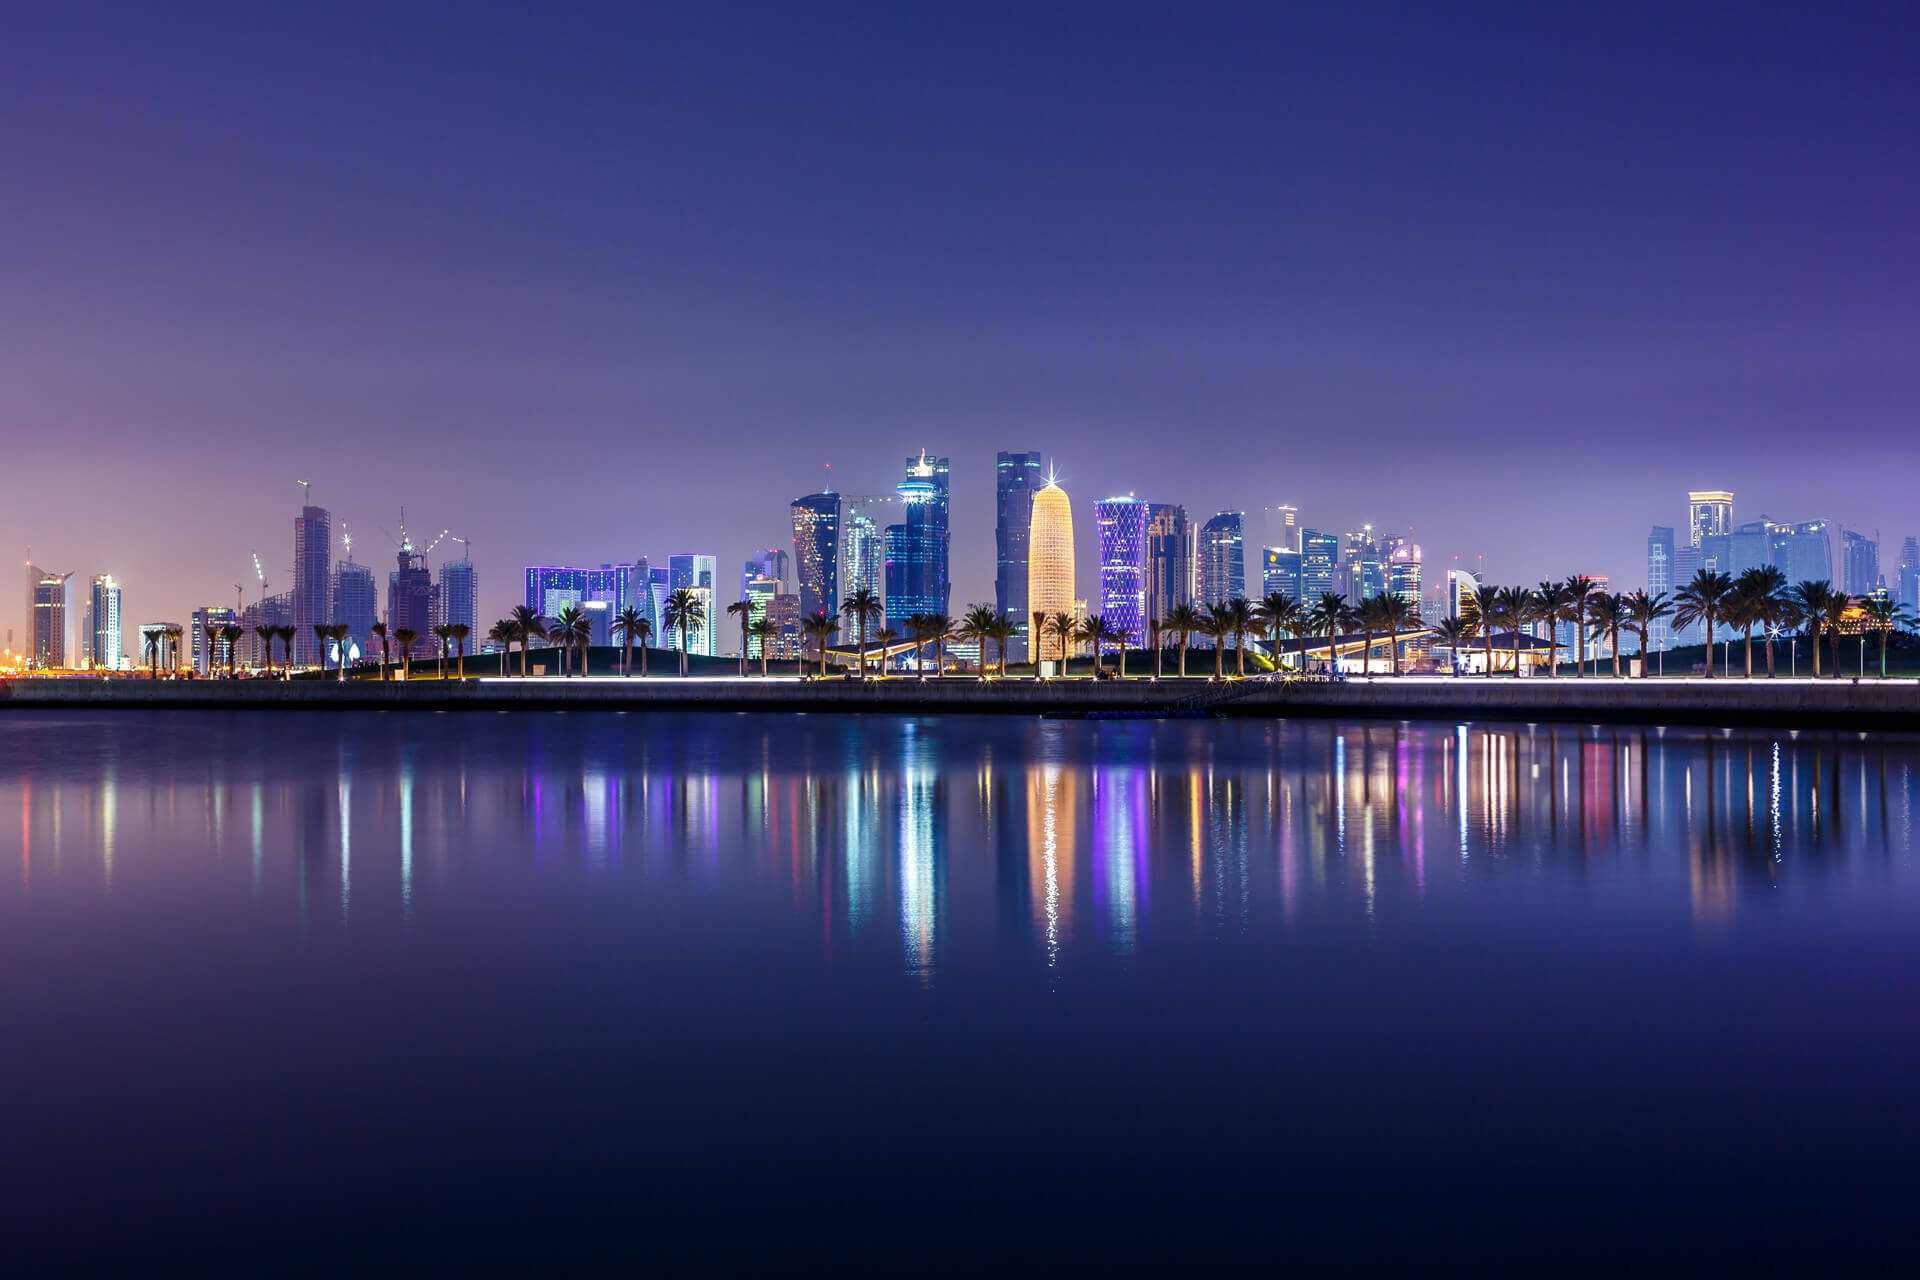 Doha city skyline at night in Qatar - Middle East